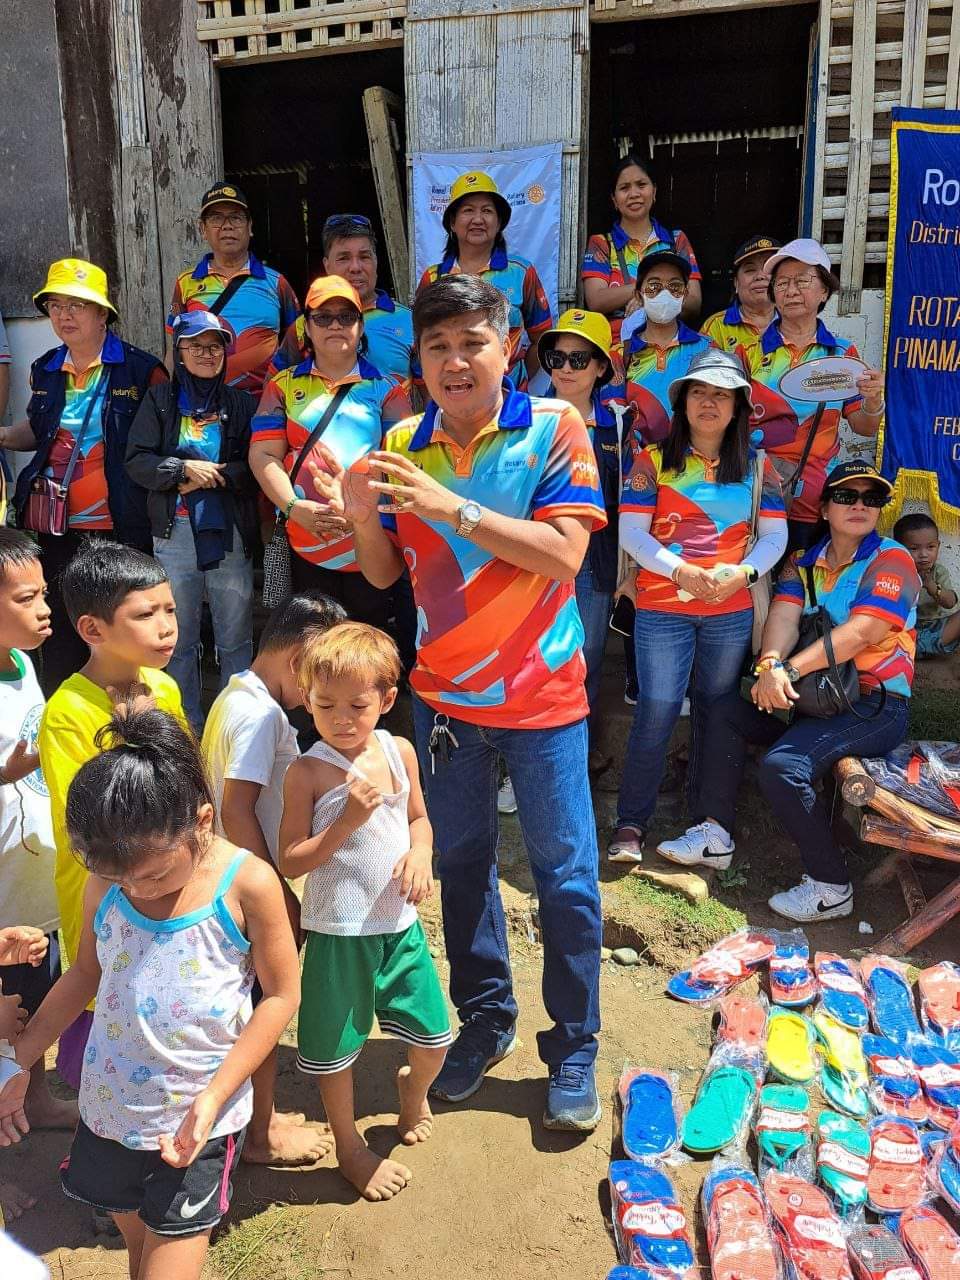 Rotary Club Pinamalayan Central, Jollibee Bring Joy to Kids in Isolated Village